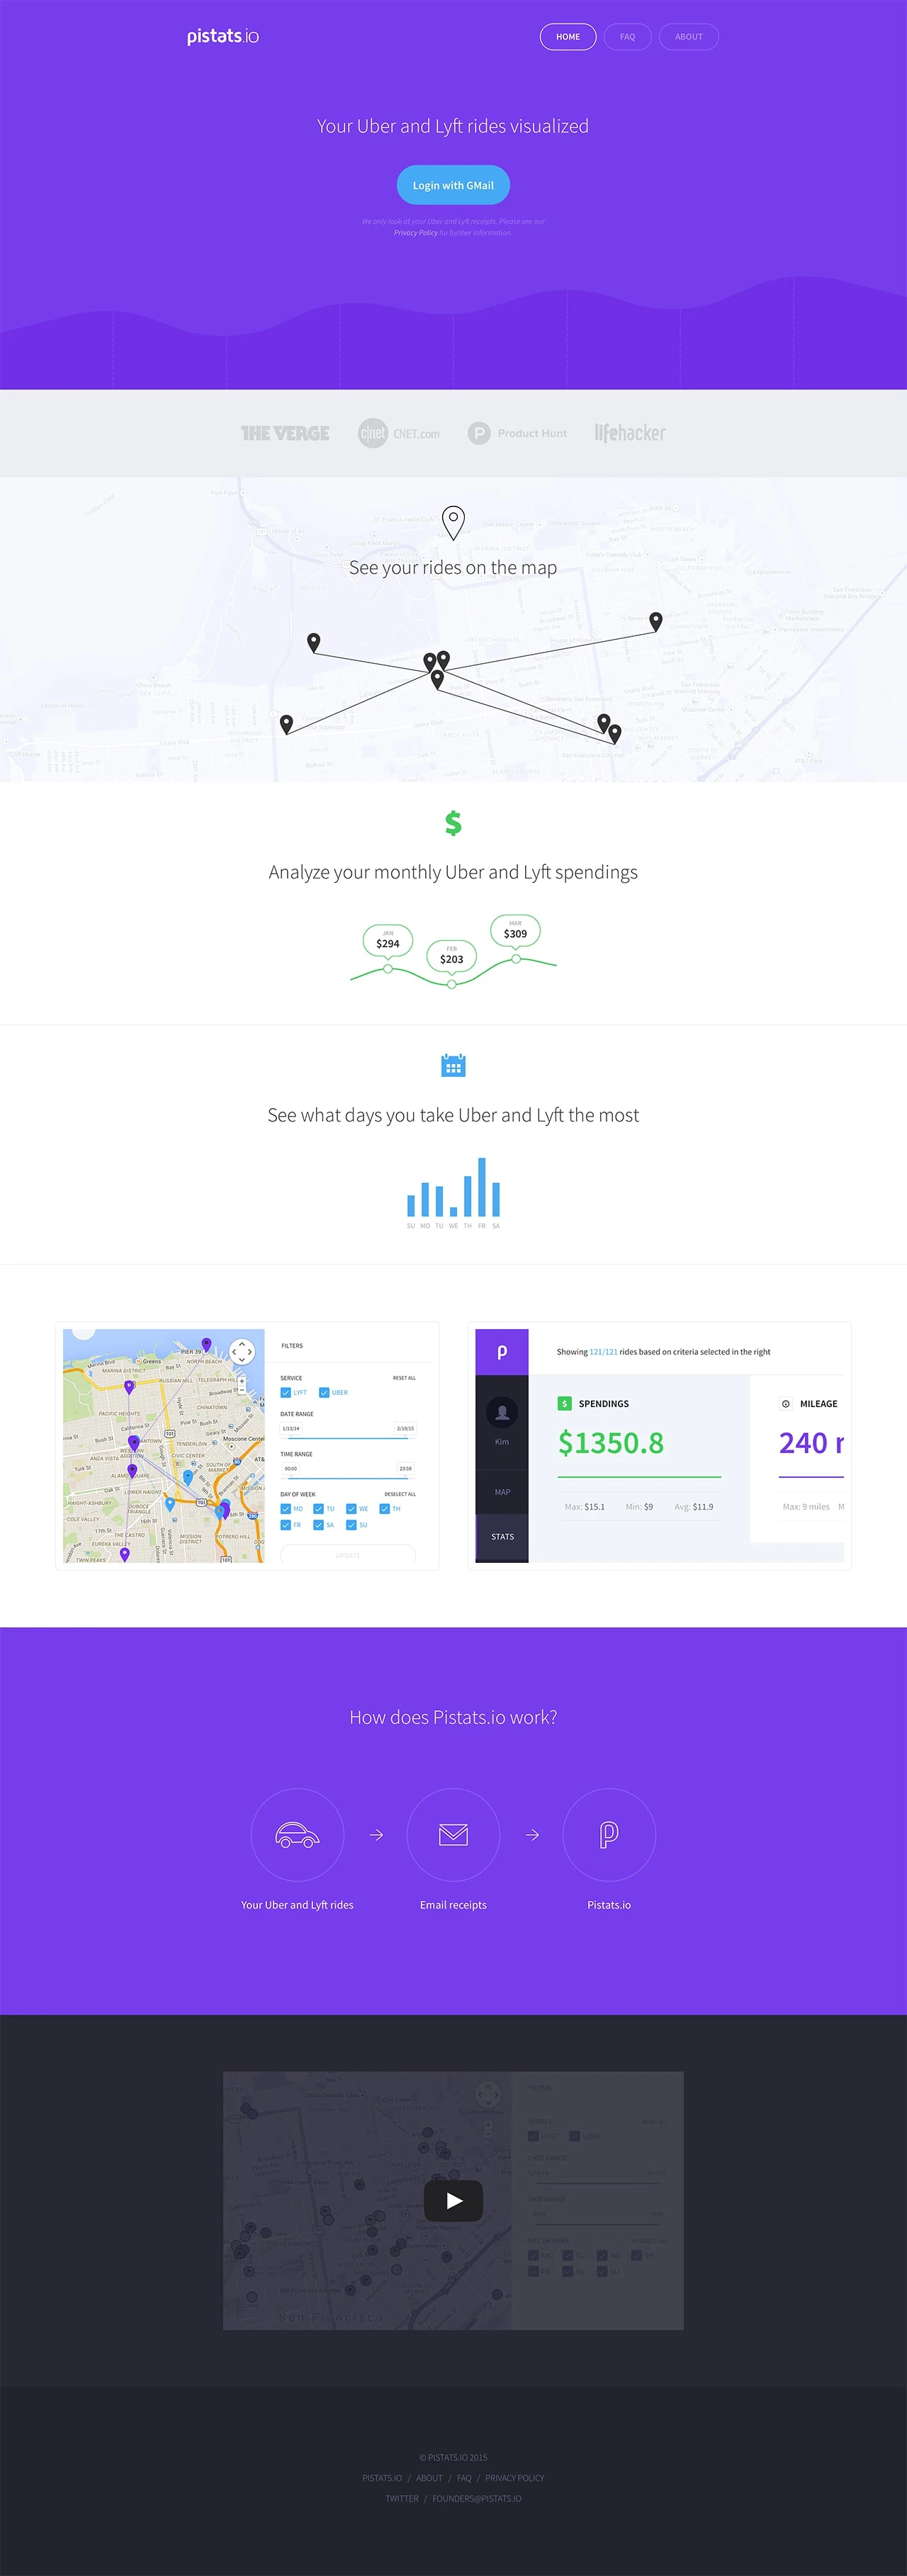 Pistats Landing Page Example: Your Uber and Lyft rides visualized